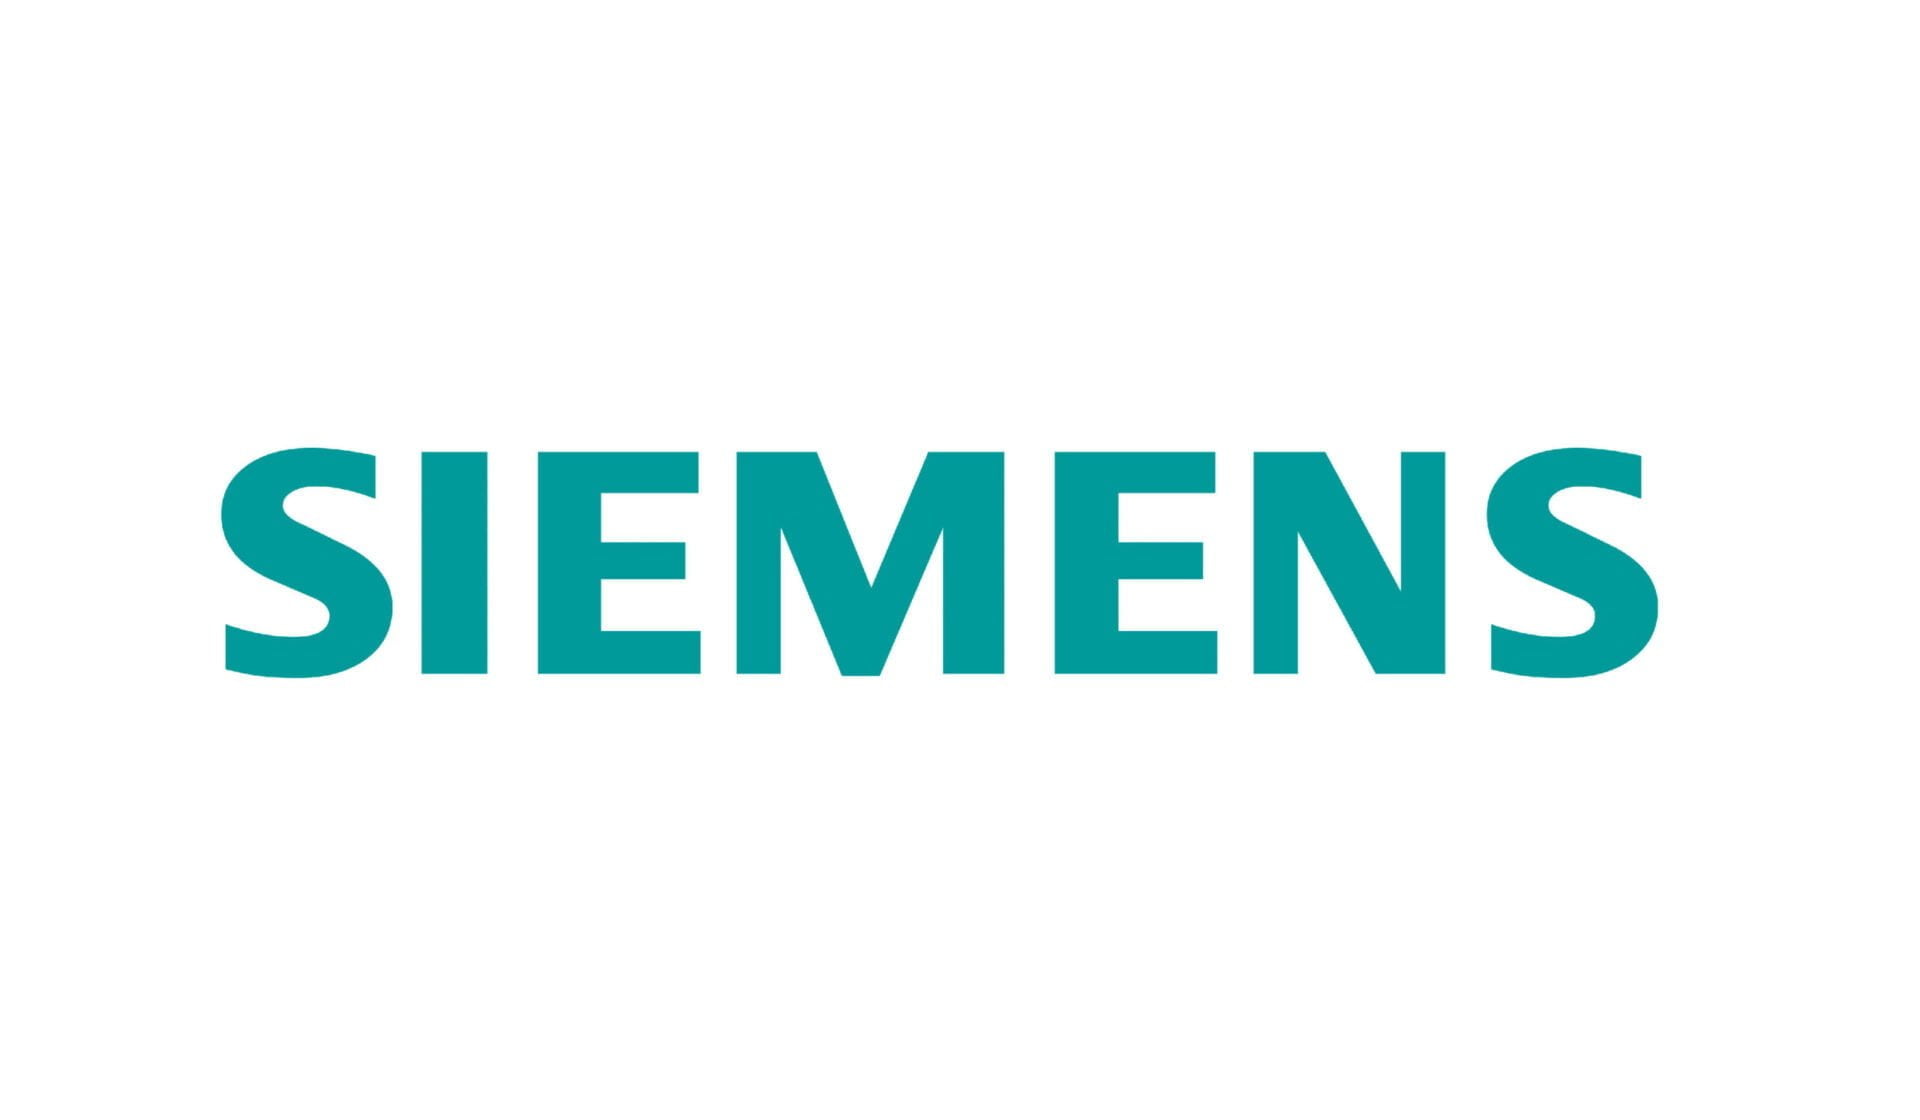 Siemens logo in turquoise text